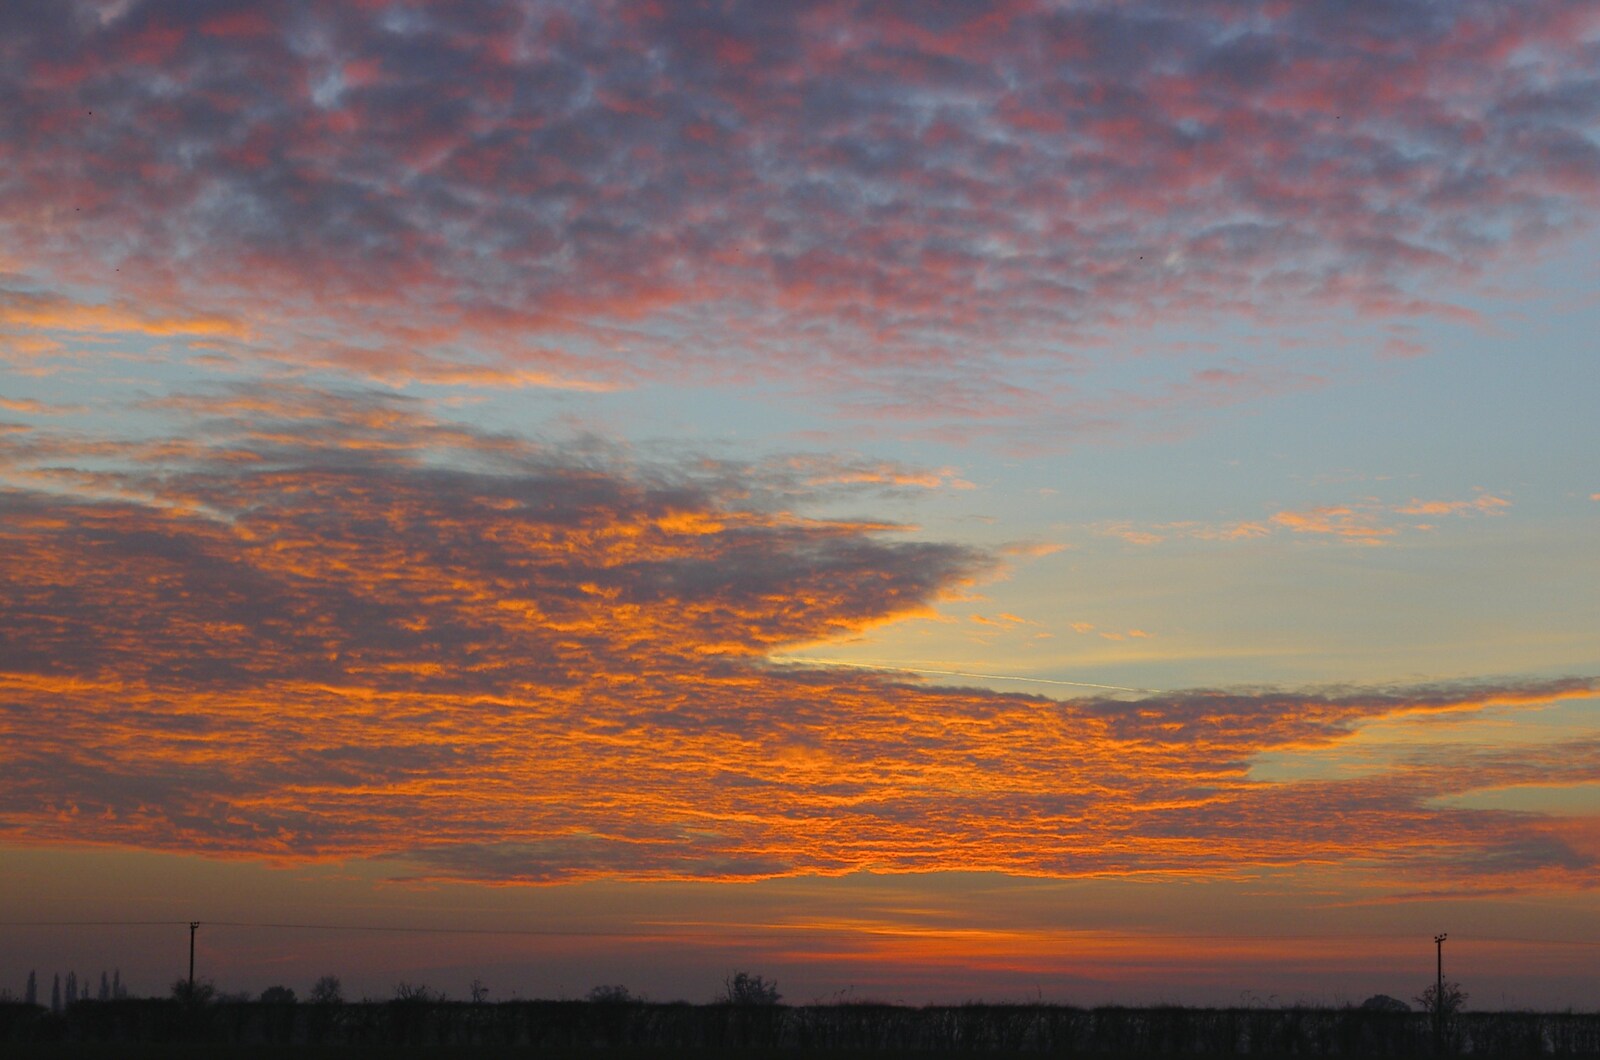 An Ashbocking sunset from Pheasants, Sunsets and The BBs at Bressingham, Norfolk - 11th December 2005